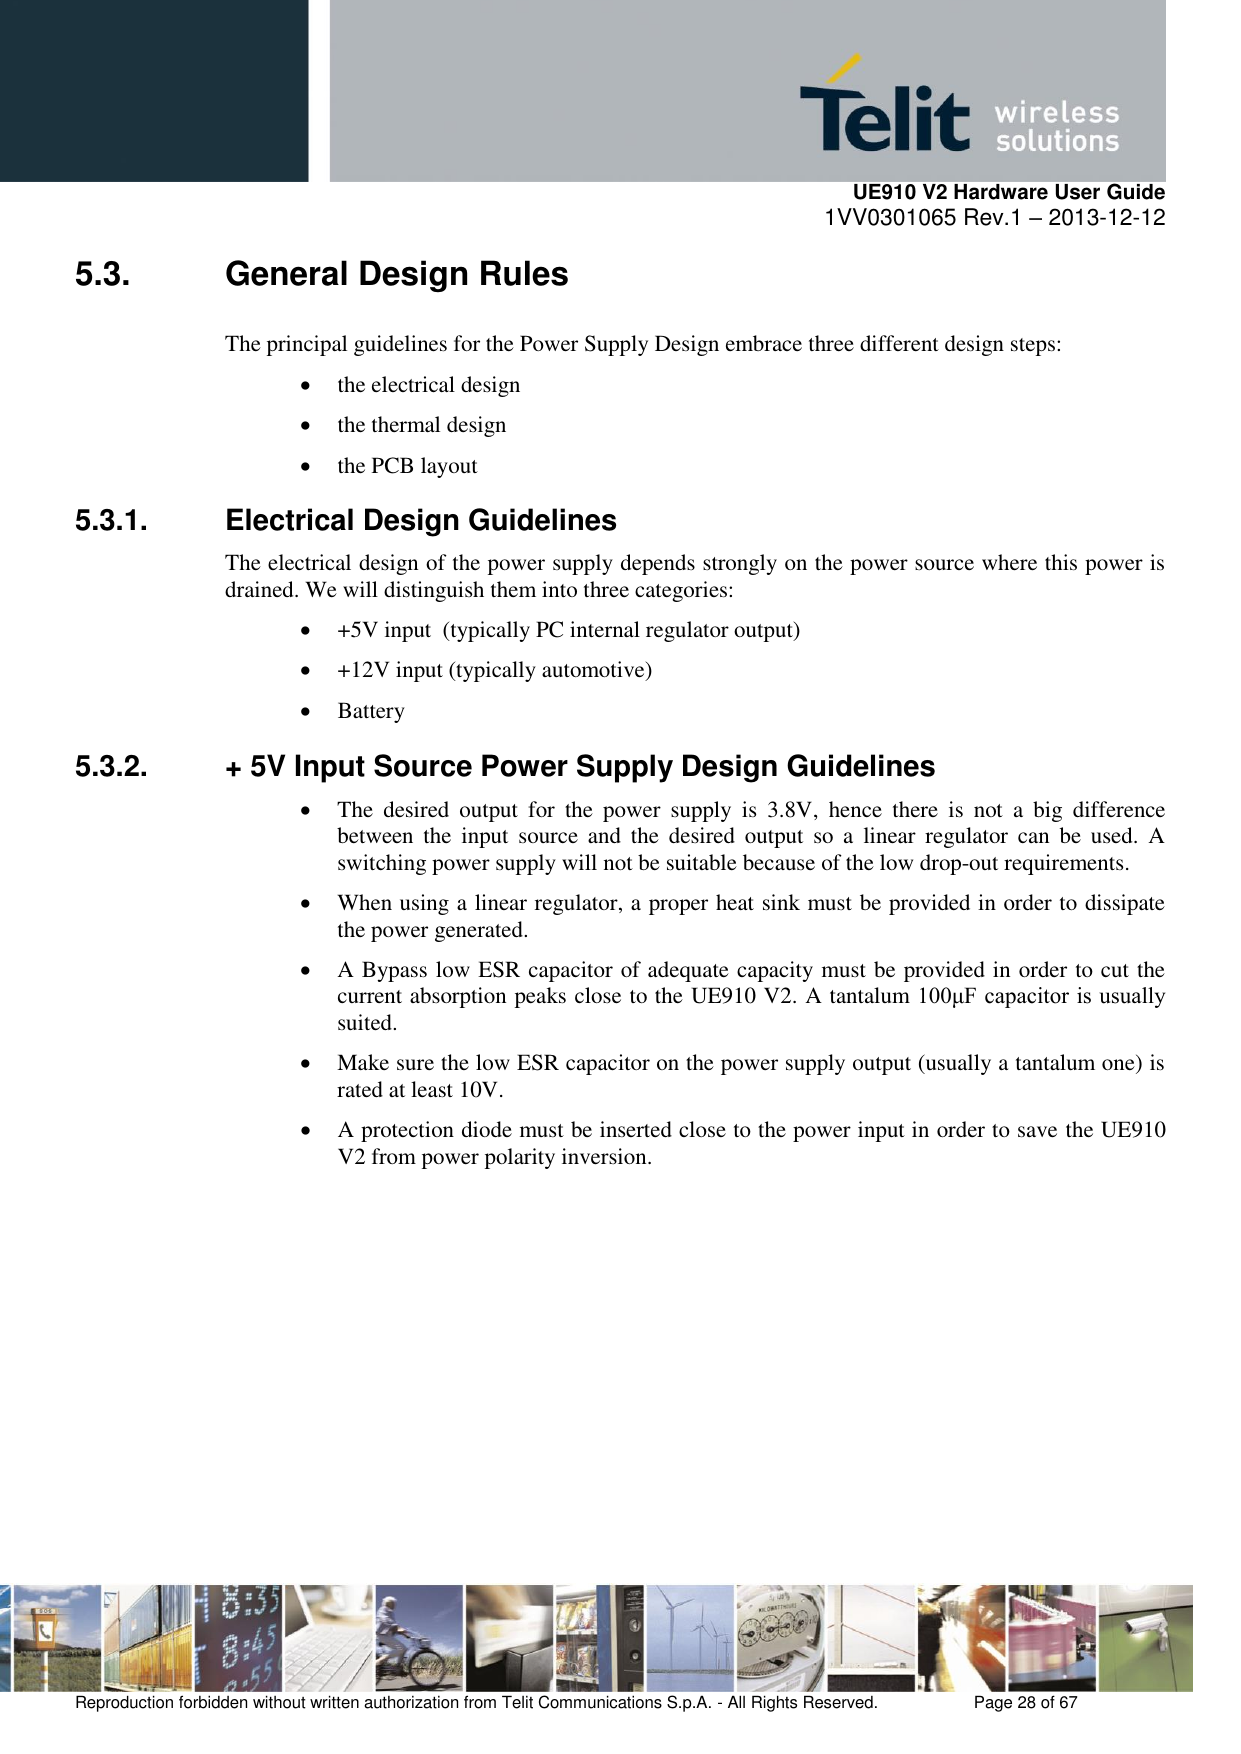     UE910 V2 Hardware User Guide 1VV0301065 Rev.1 – 2013-12-12  Reproduction forbidden without written authorization from Telit Communications S.p.A. - All Rights Reserved.    Page 28 of 67                                                     5.3.  General Design Rules The principal guidelines for the Power Supply Design embrace three different design steps:  the electrical design  the thermal design  the PCB layout 5.3.1.  Electrical Design Guidelines The electrical design of the power supply depends strongly on the power source where this power is drained. We will distinguish them into three categories:  +5V input  (typically PC internal regulator output)  +12V input (typically automotive)  Battery 5.3.2.  + 5V Input Source Power Supply Design Guidelines  The  desired  output  for  the  power  supply  is  3.8V,  hence  there  is  not  a  big  difference between  the  input  source  and  the  desired  output  so  a  linear  regulator  can  be  used.  A switching power supply will not be suitable because of the low drop-out requirements.  When using a linear regulator, a proper heat sink must be provided in order to dissipate the power generated.  A Bypass low ESR capacitor of adequate capacity must be provided in order to cut the current absorption peaks close to the UE910 V2. A tantalum 100μF capacitor is usually suited.  Make sure the low ESR capacitor on the power supply output (usually a tantalum one) is rated at least 10V.  A protection diode must be inserted close to the power input in order to save the UE910 V2 from power polarity inversion.          